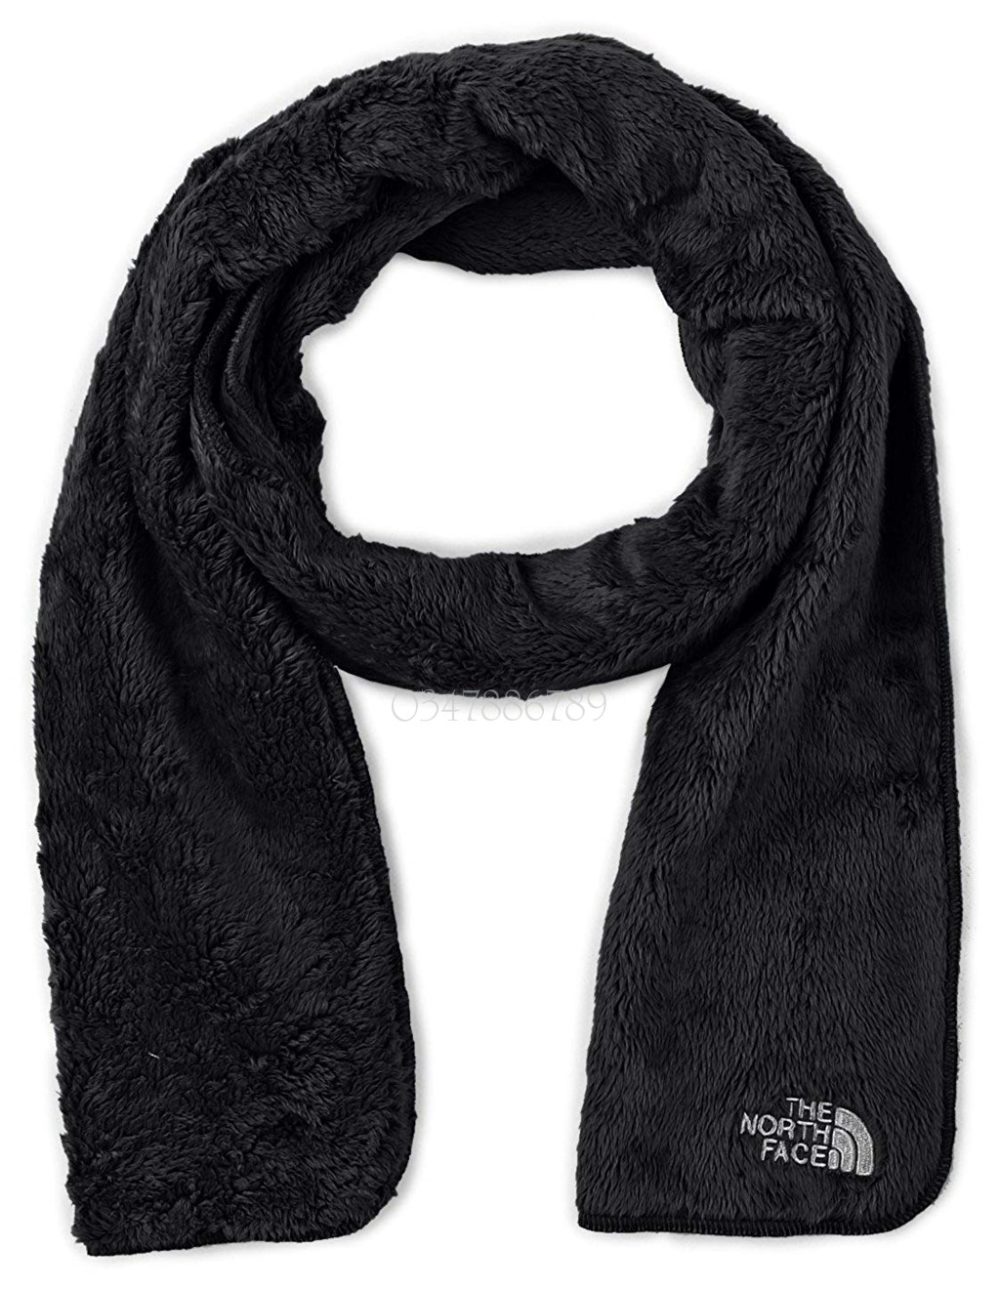 The North Face Denali Thermal Scarf The North Face ktmart.vn 0